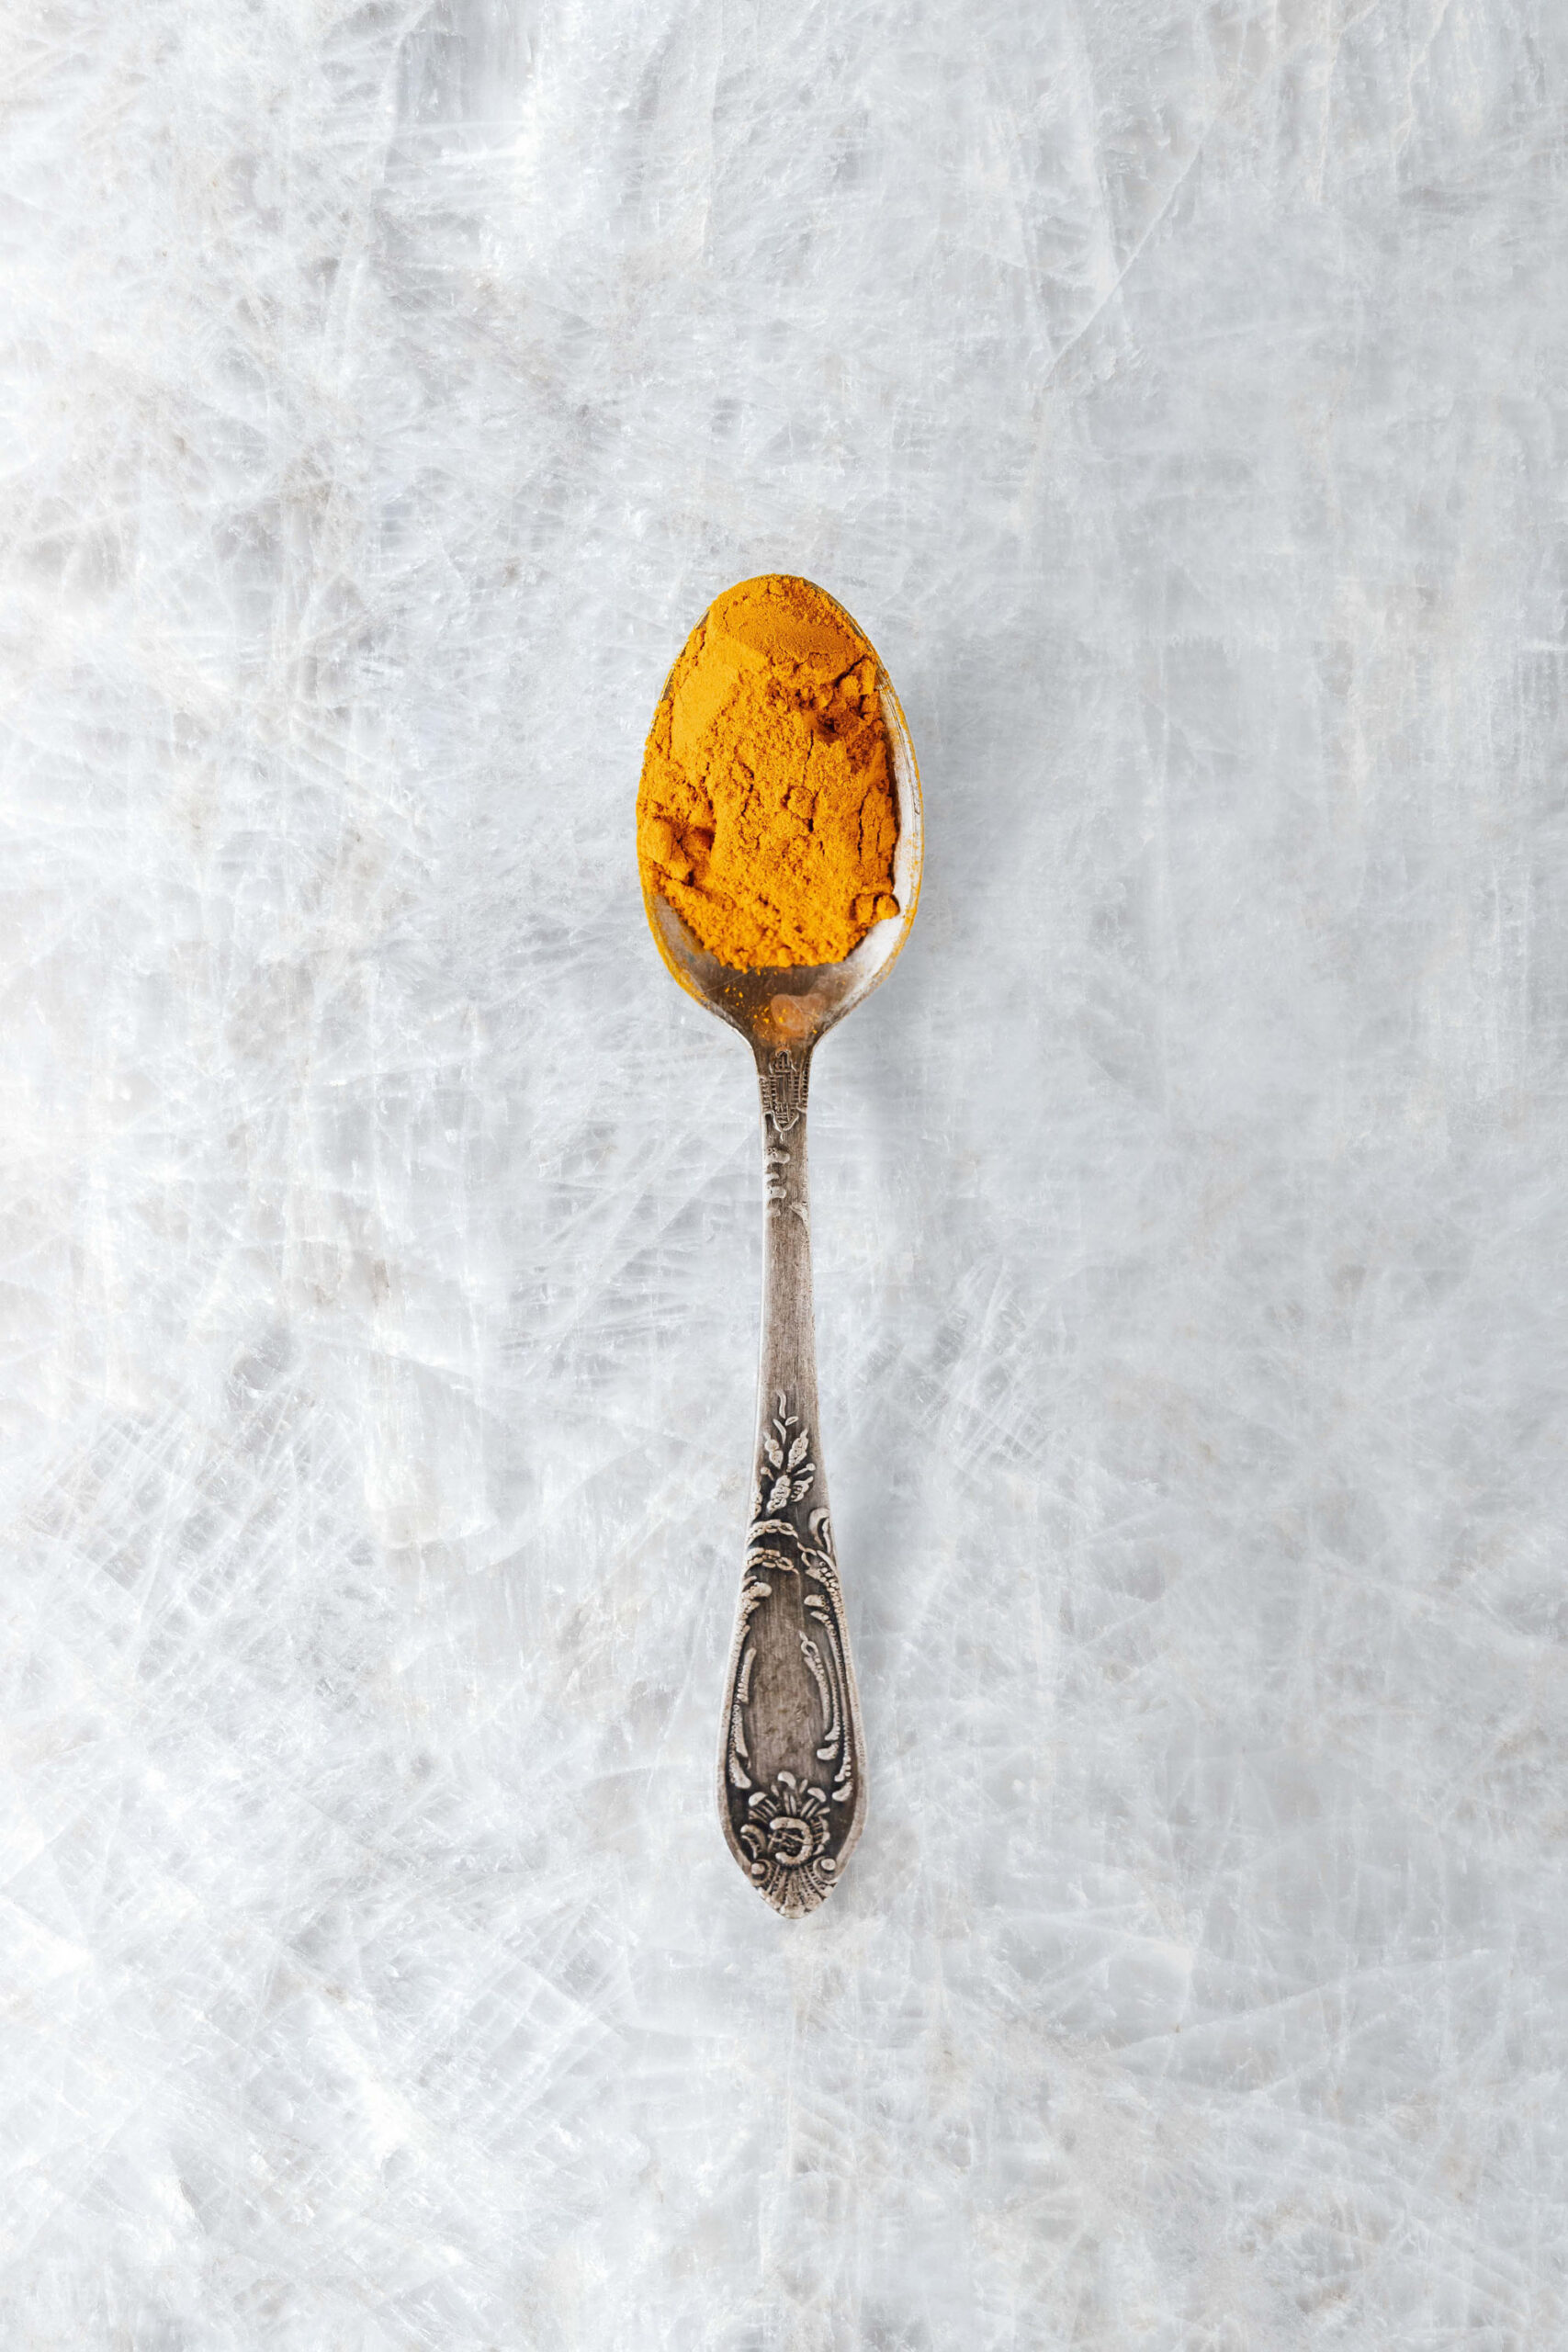 Silver spoon holding turmeric powder resting on white ceramic tile surface.